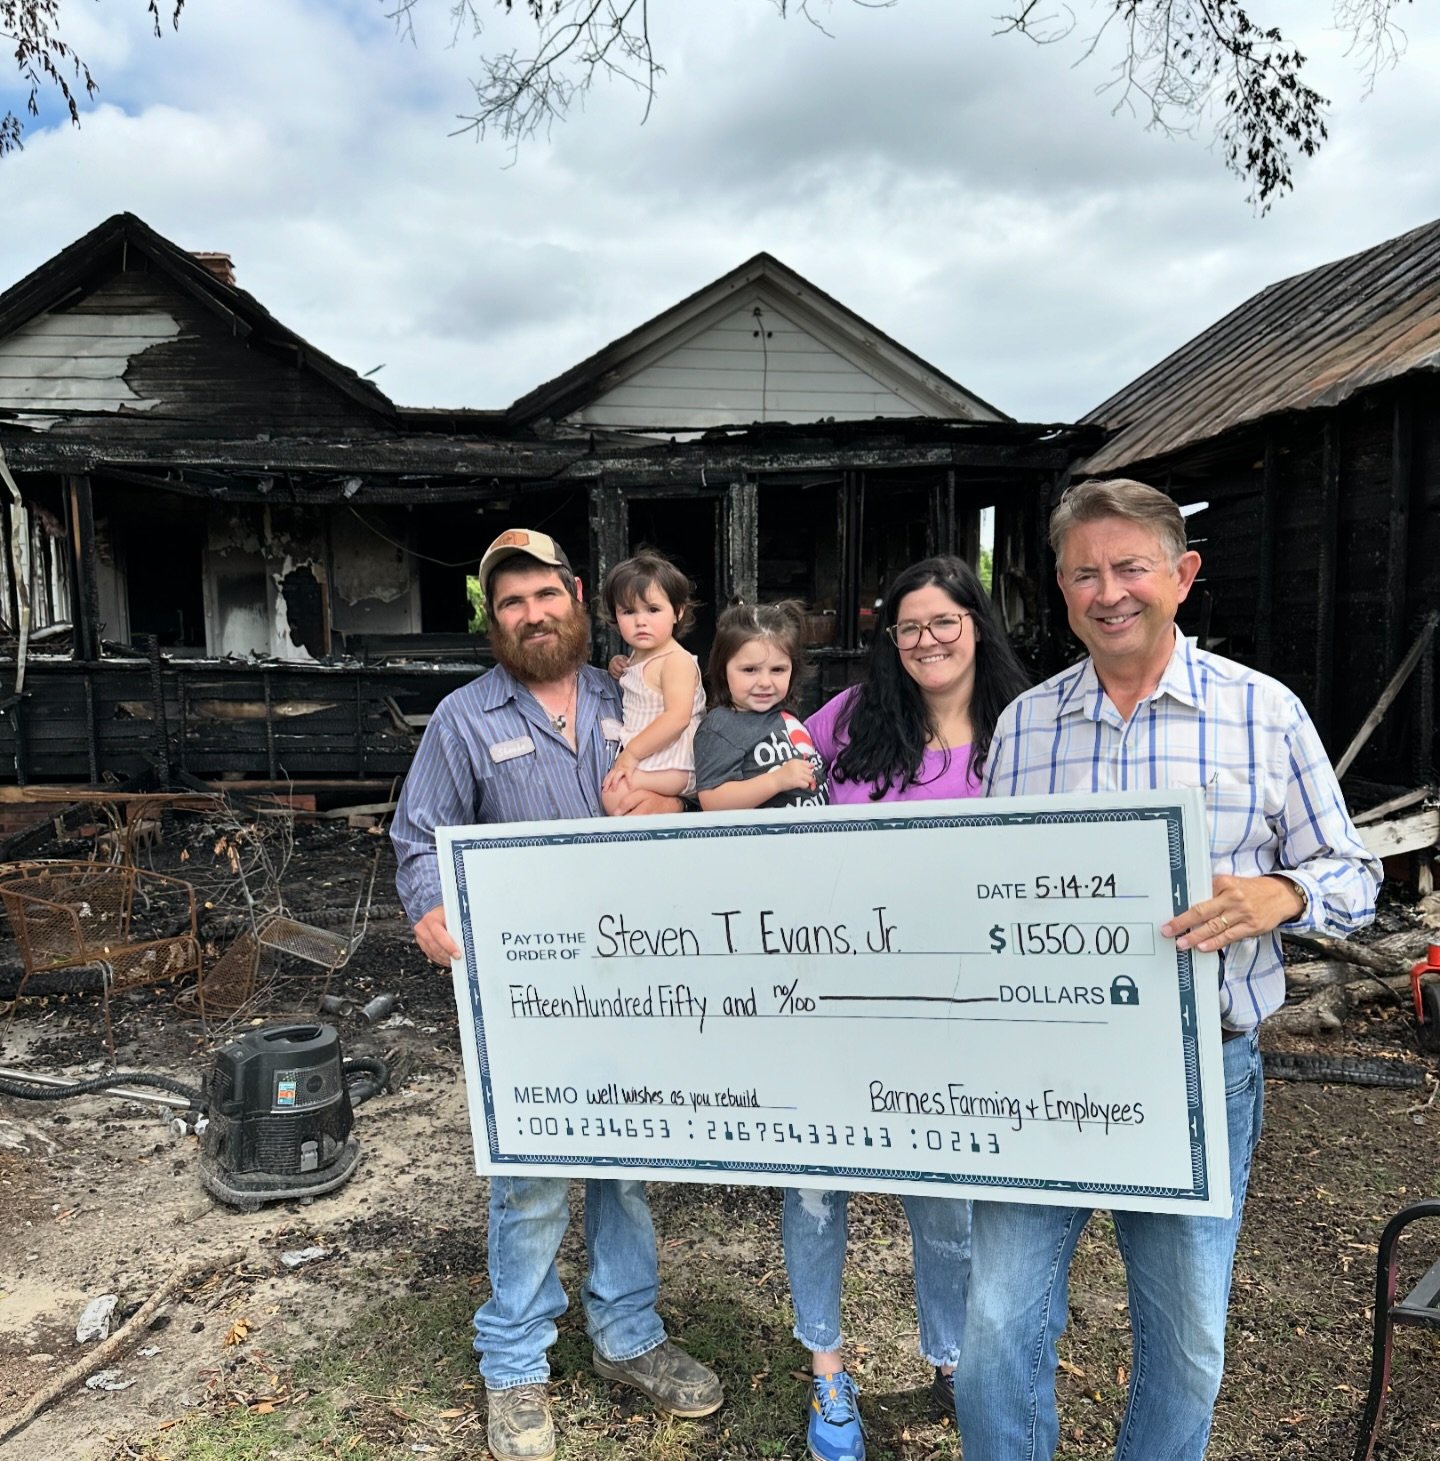 A devastating fire burned down the home of a farming family that we work very closely with 💔

Just as we did with our employee who had a similar tragic experience last year, our employees and company came together to support one of our own. 

If you